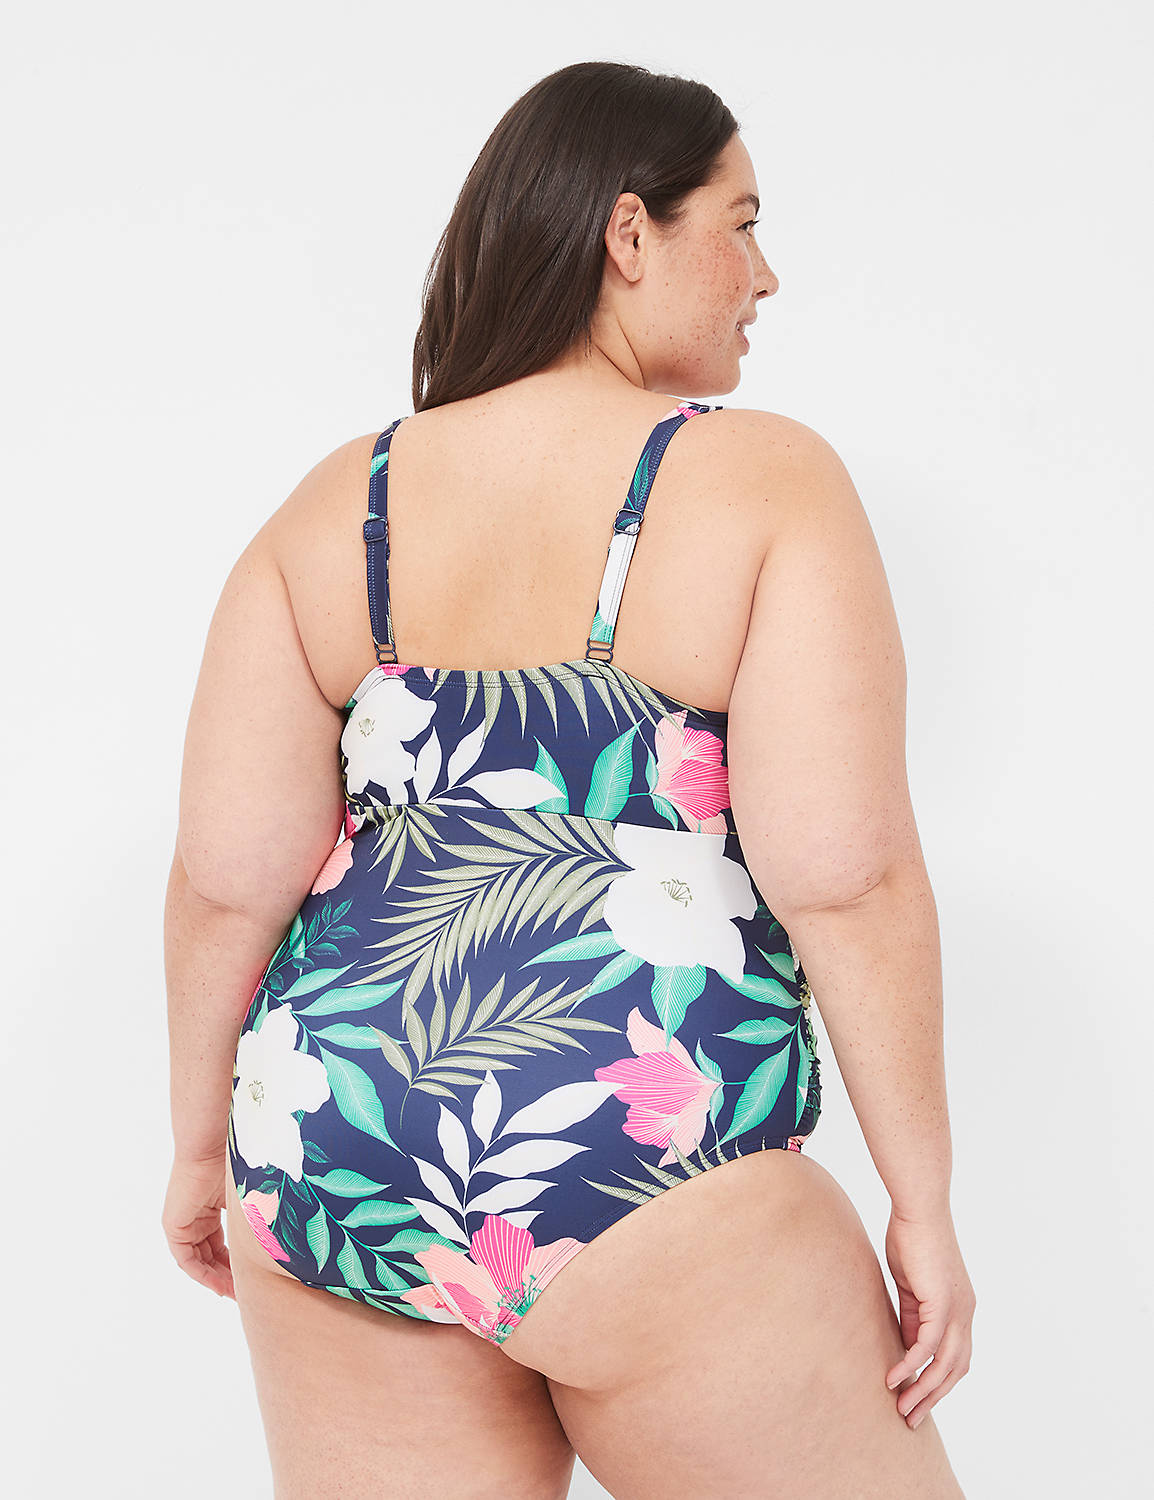 NW Wrap Plunge Cheeky One Piece 113 Product Image 2